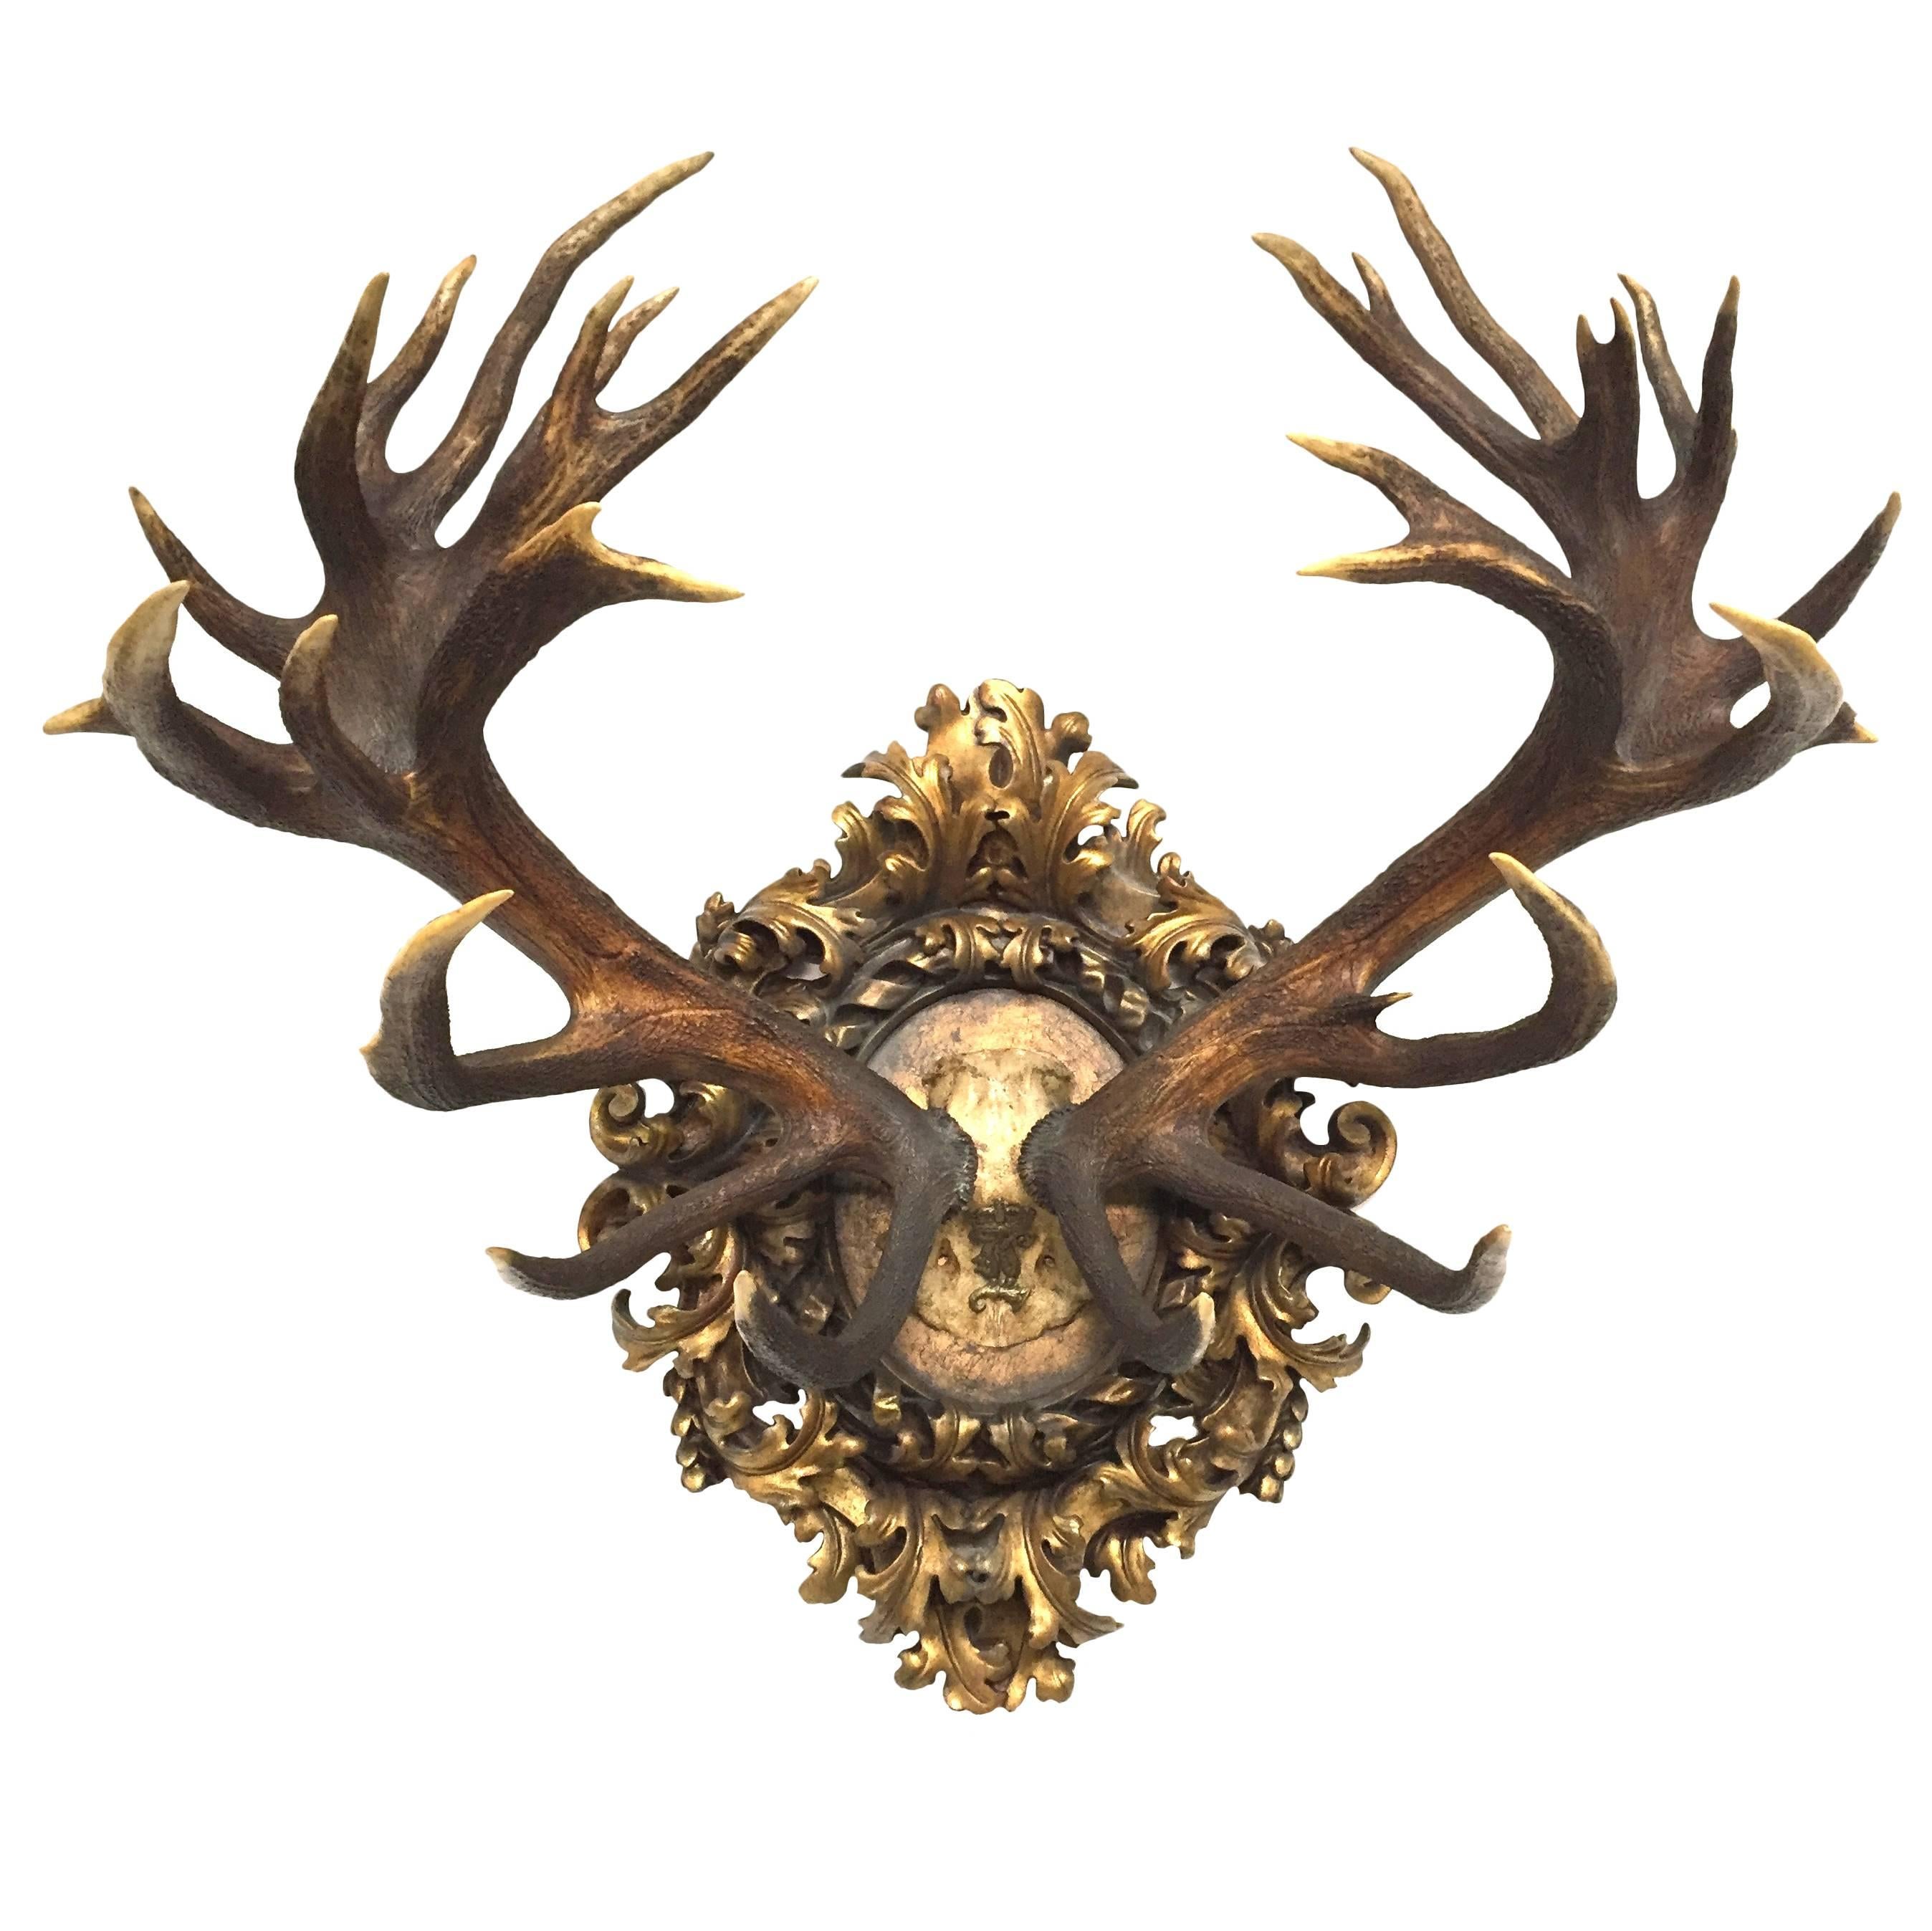 Habsburg Red Stag from Eckartsau Castle, Austria with Bavarian Wappen, 1800s